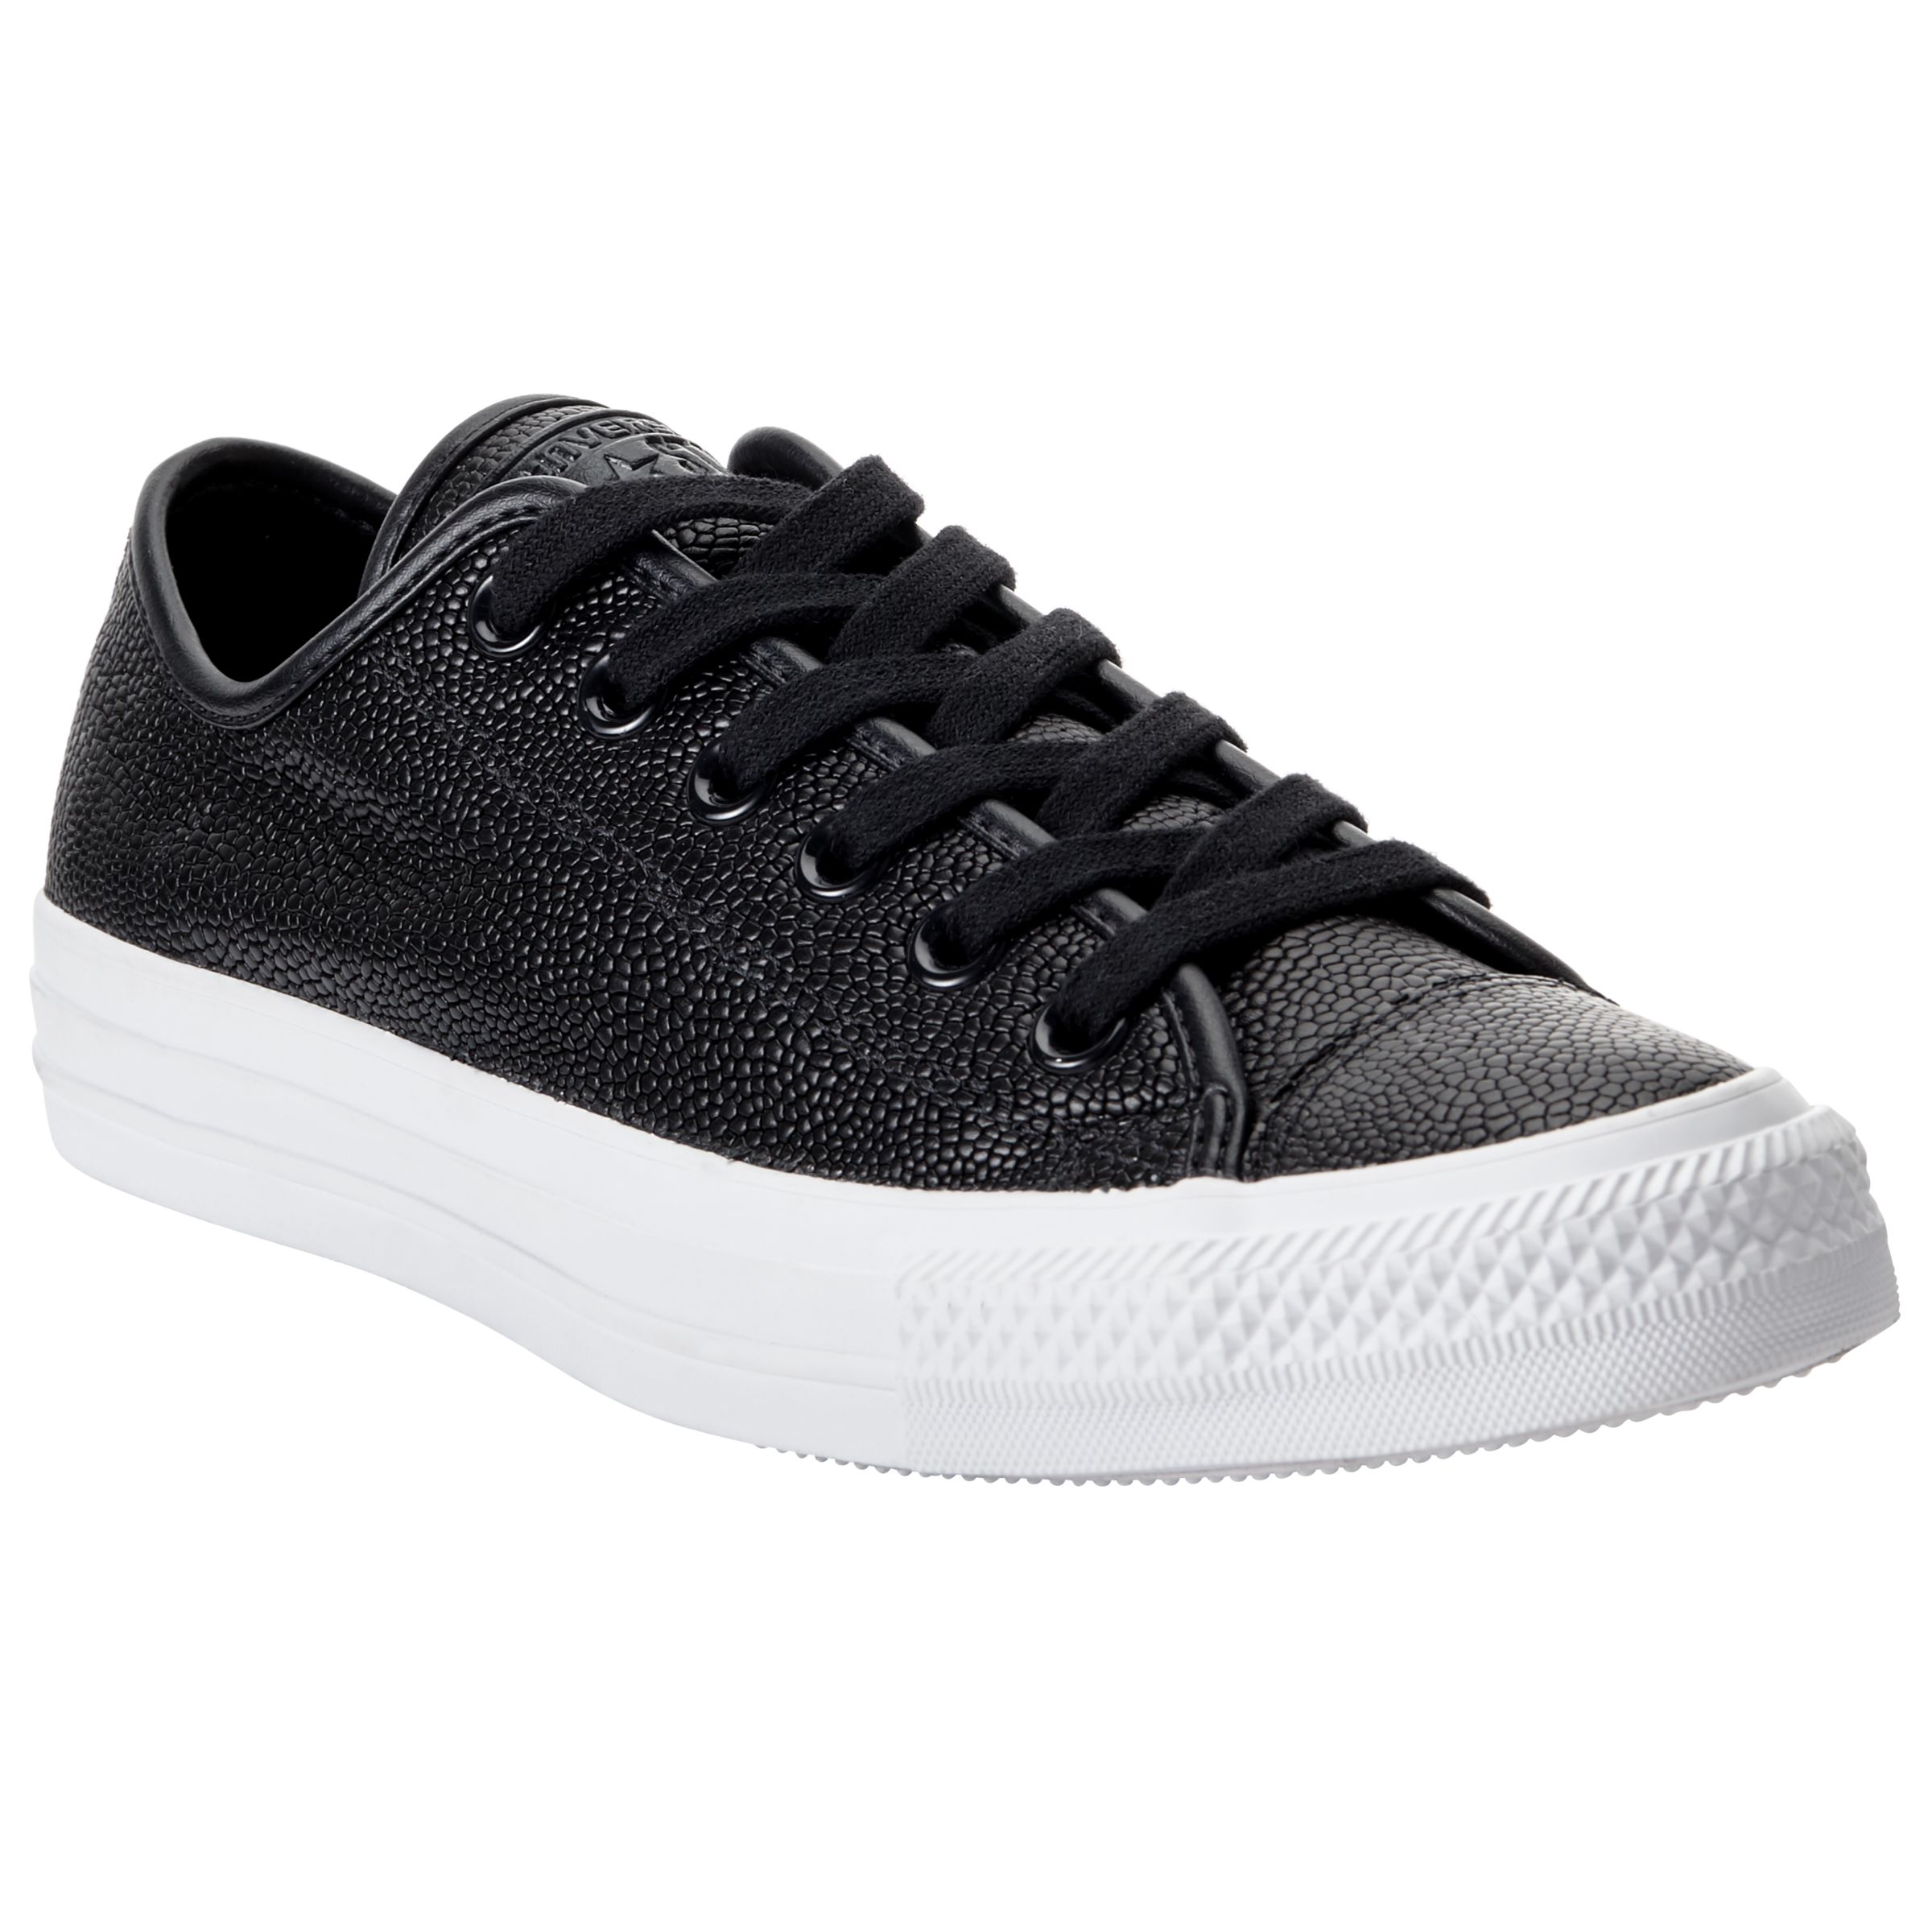 converse chuck taylor all star ox leather trainers black